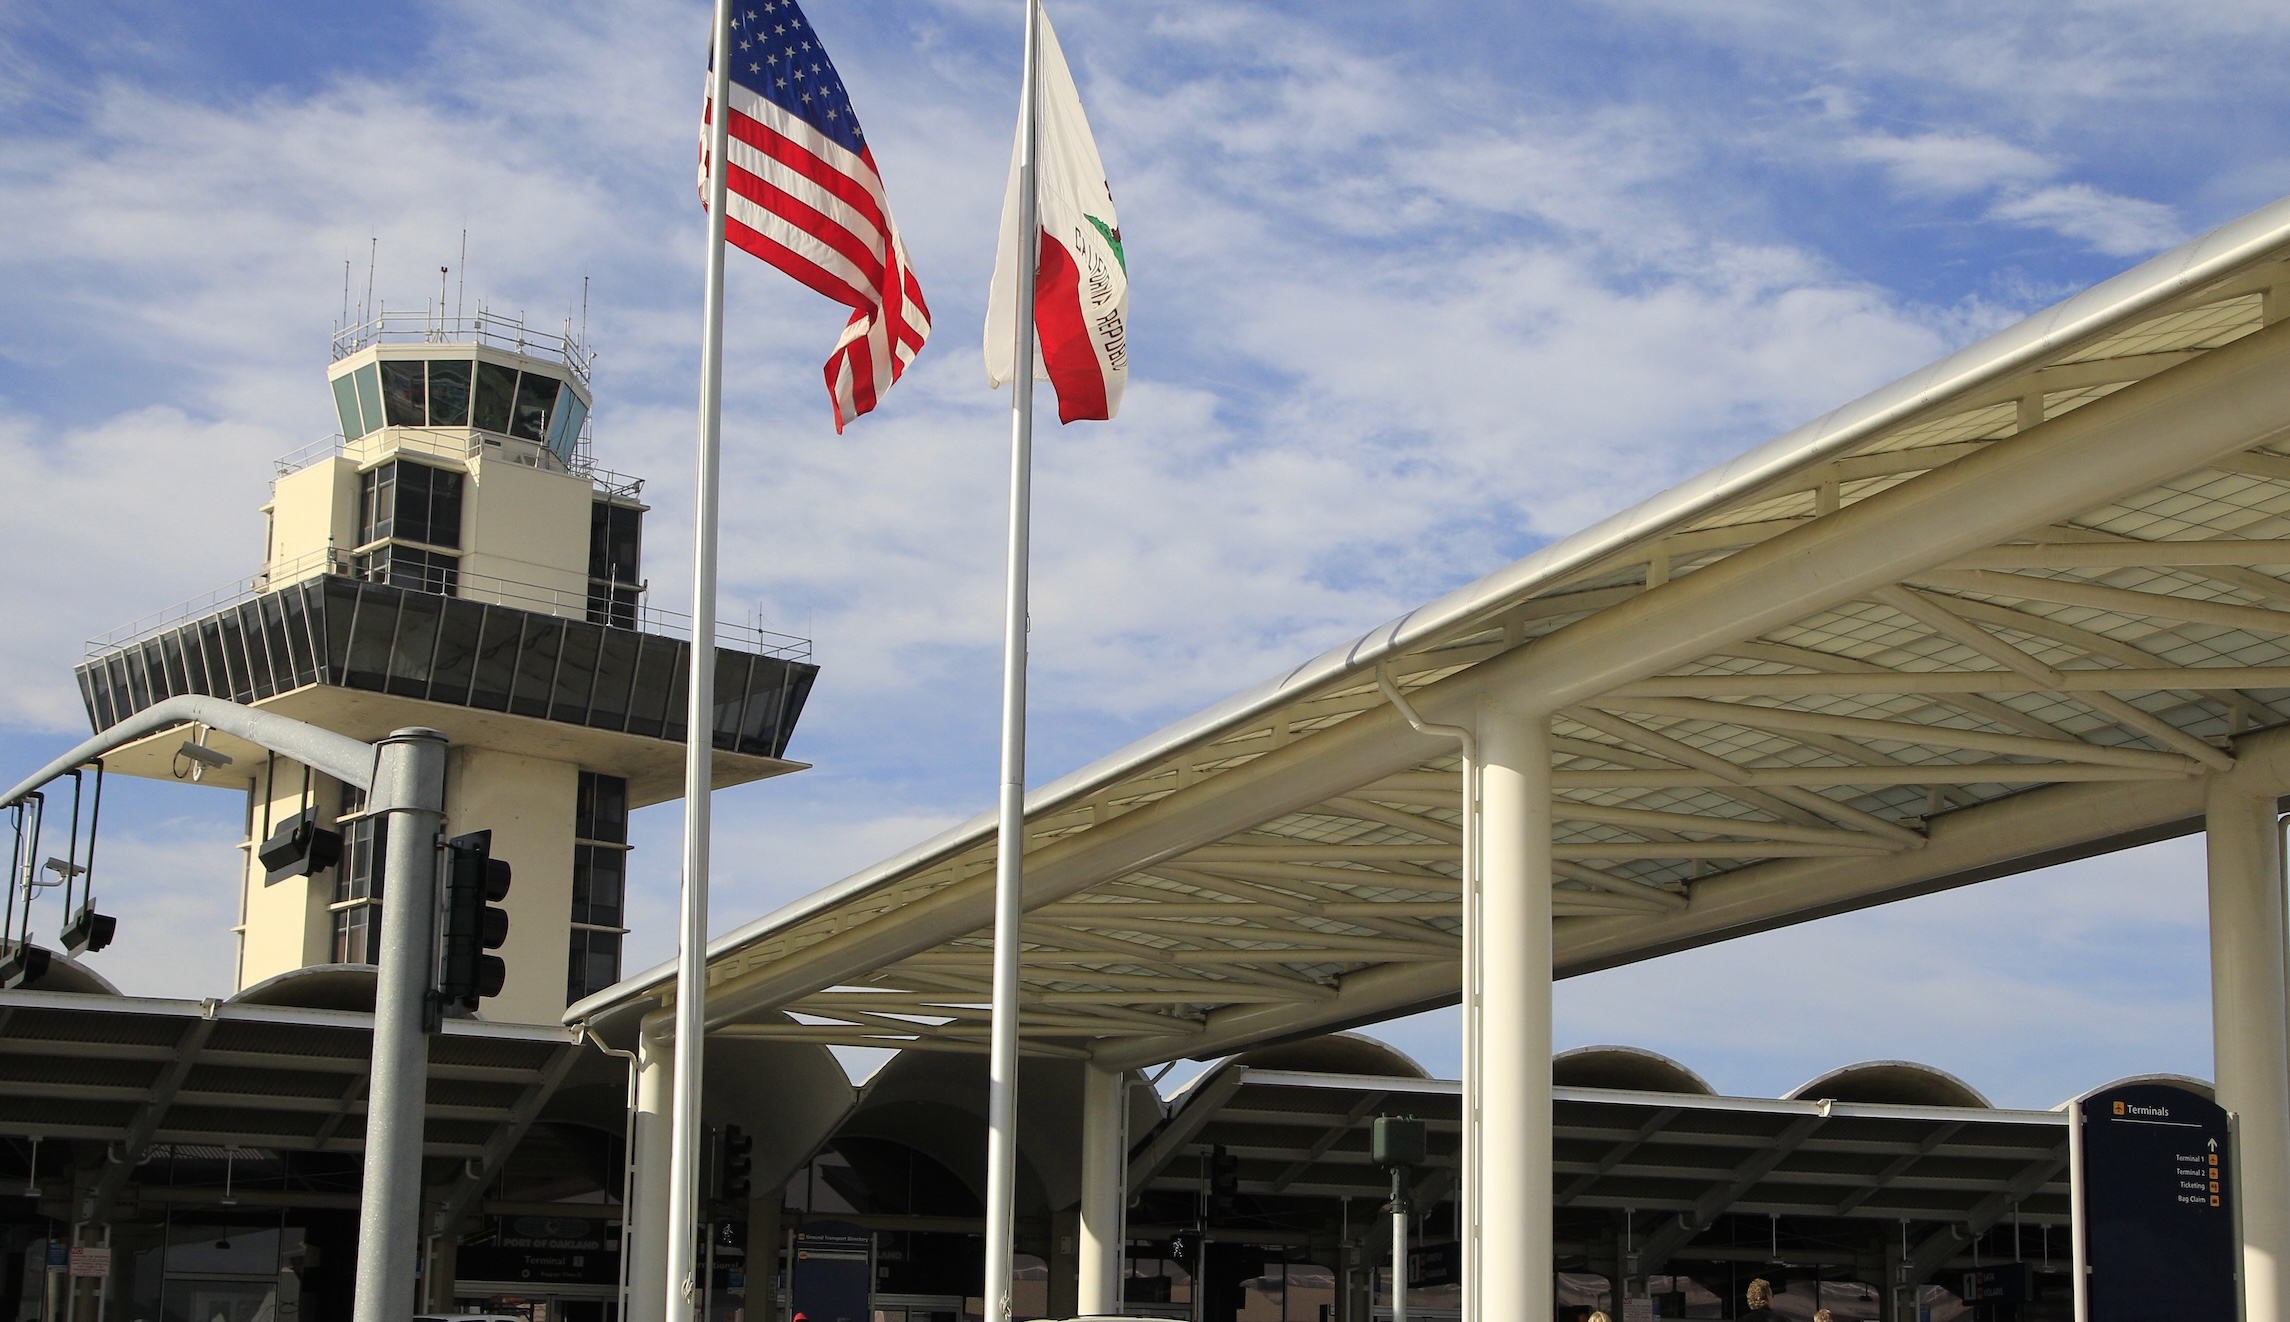 San Francisco sues Oakland over airport name change for ‘causing confusion’ – Washington Examiner